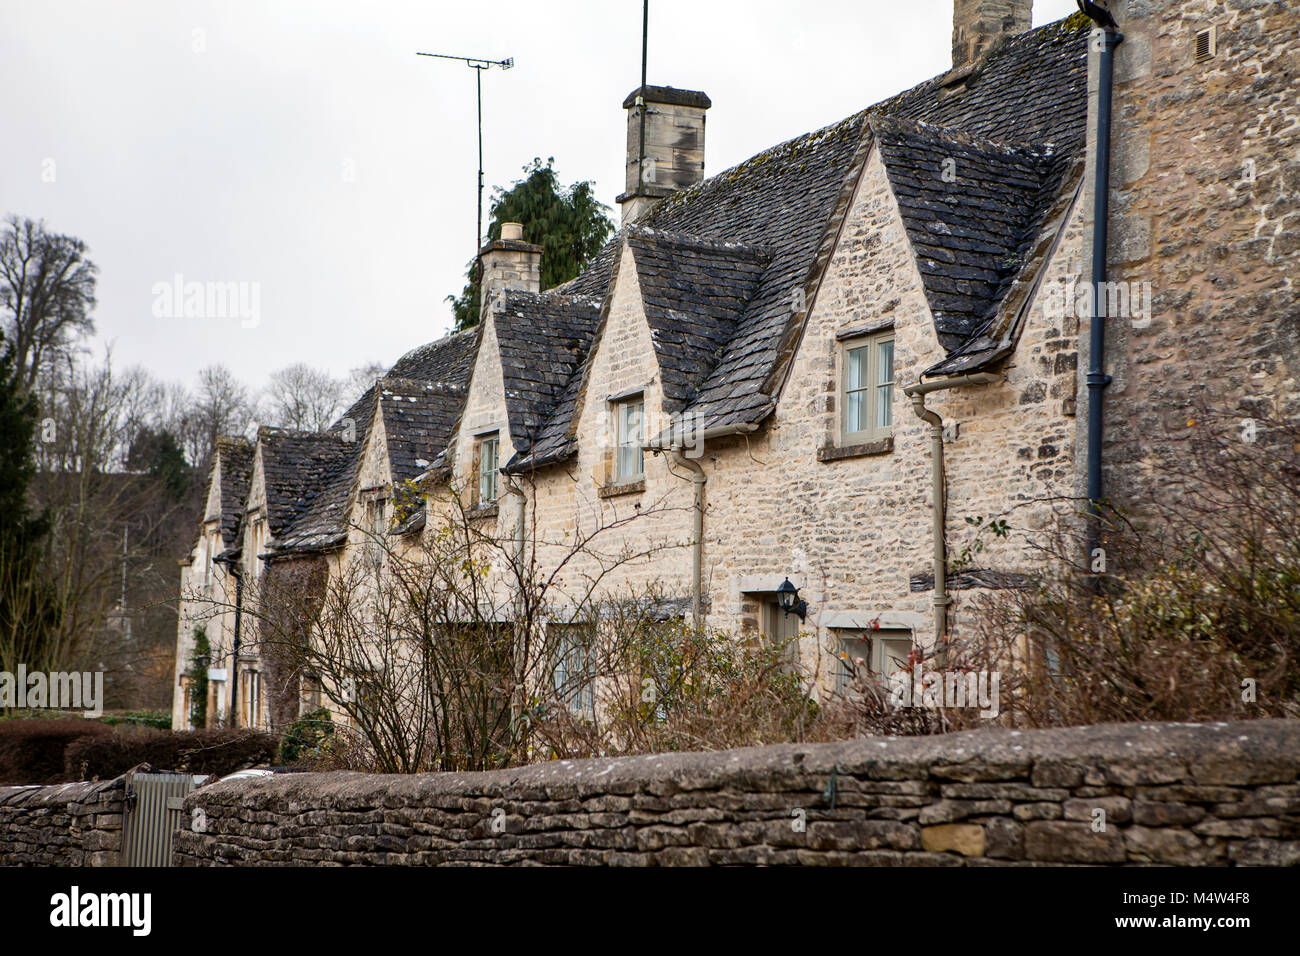 BIBURY, UK - FEBRUARY 15th, 2018: Old houses in Bibury: Bibury is a typical Costwold village with traditional english architecture. Stock Photo